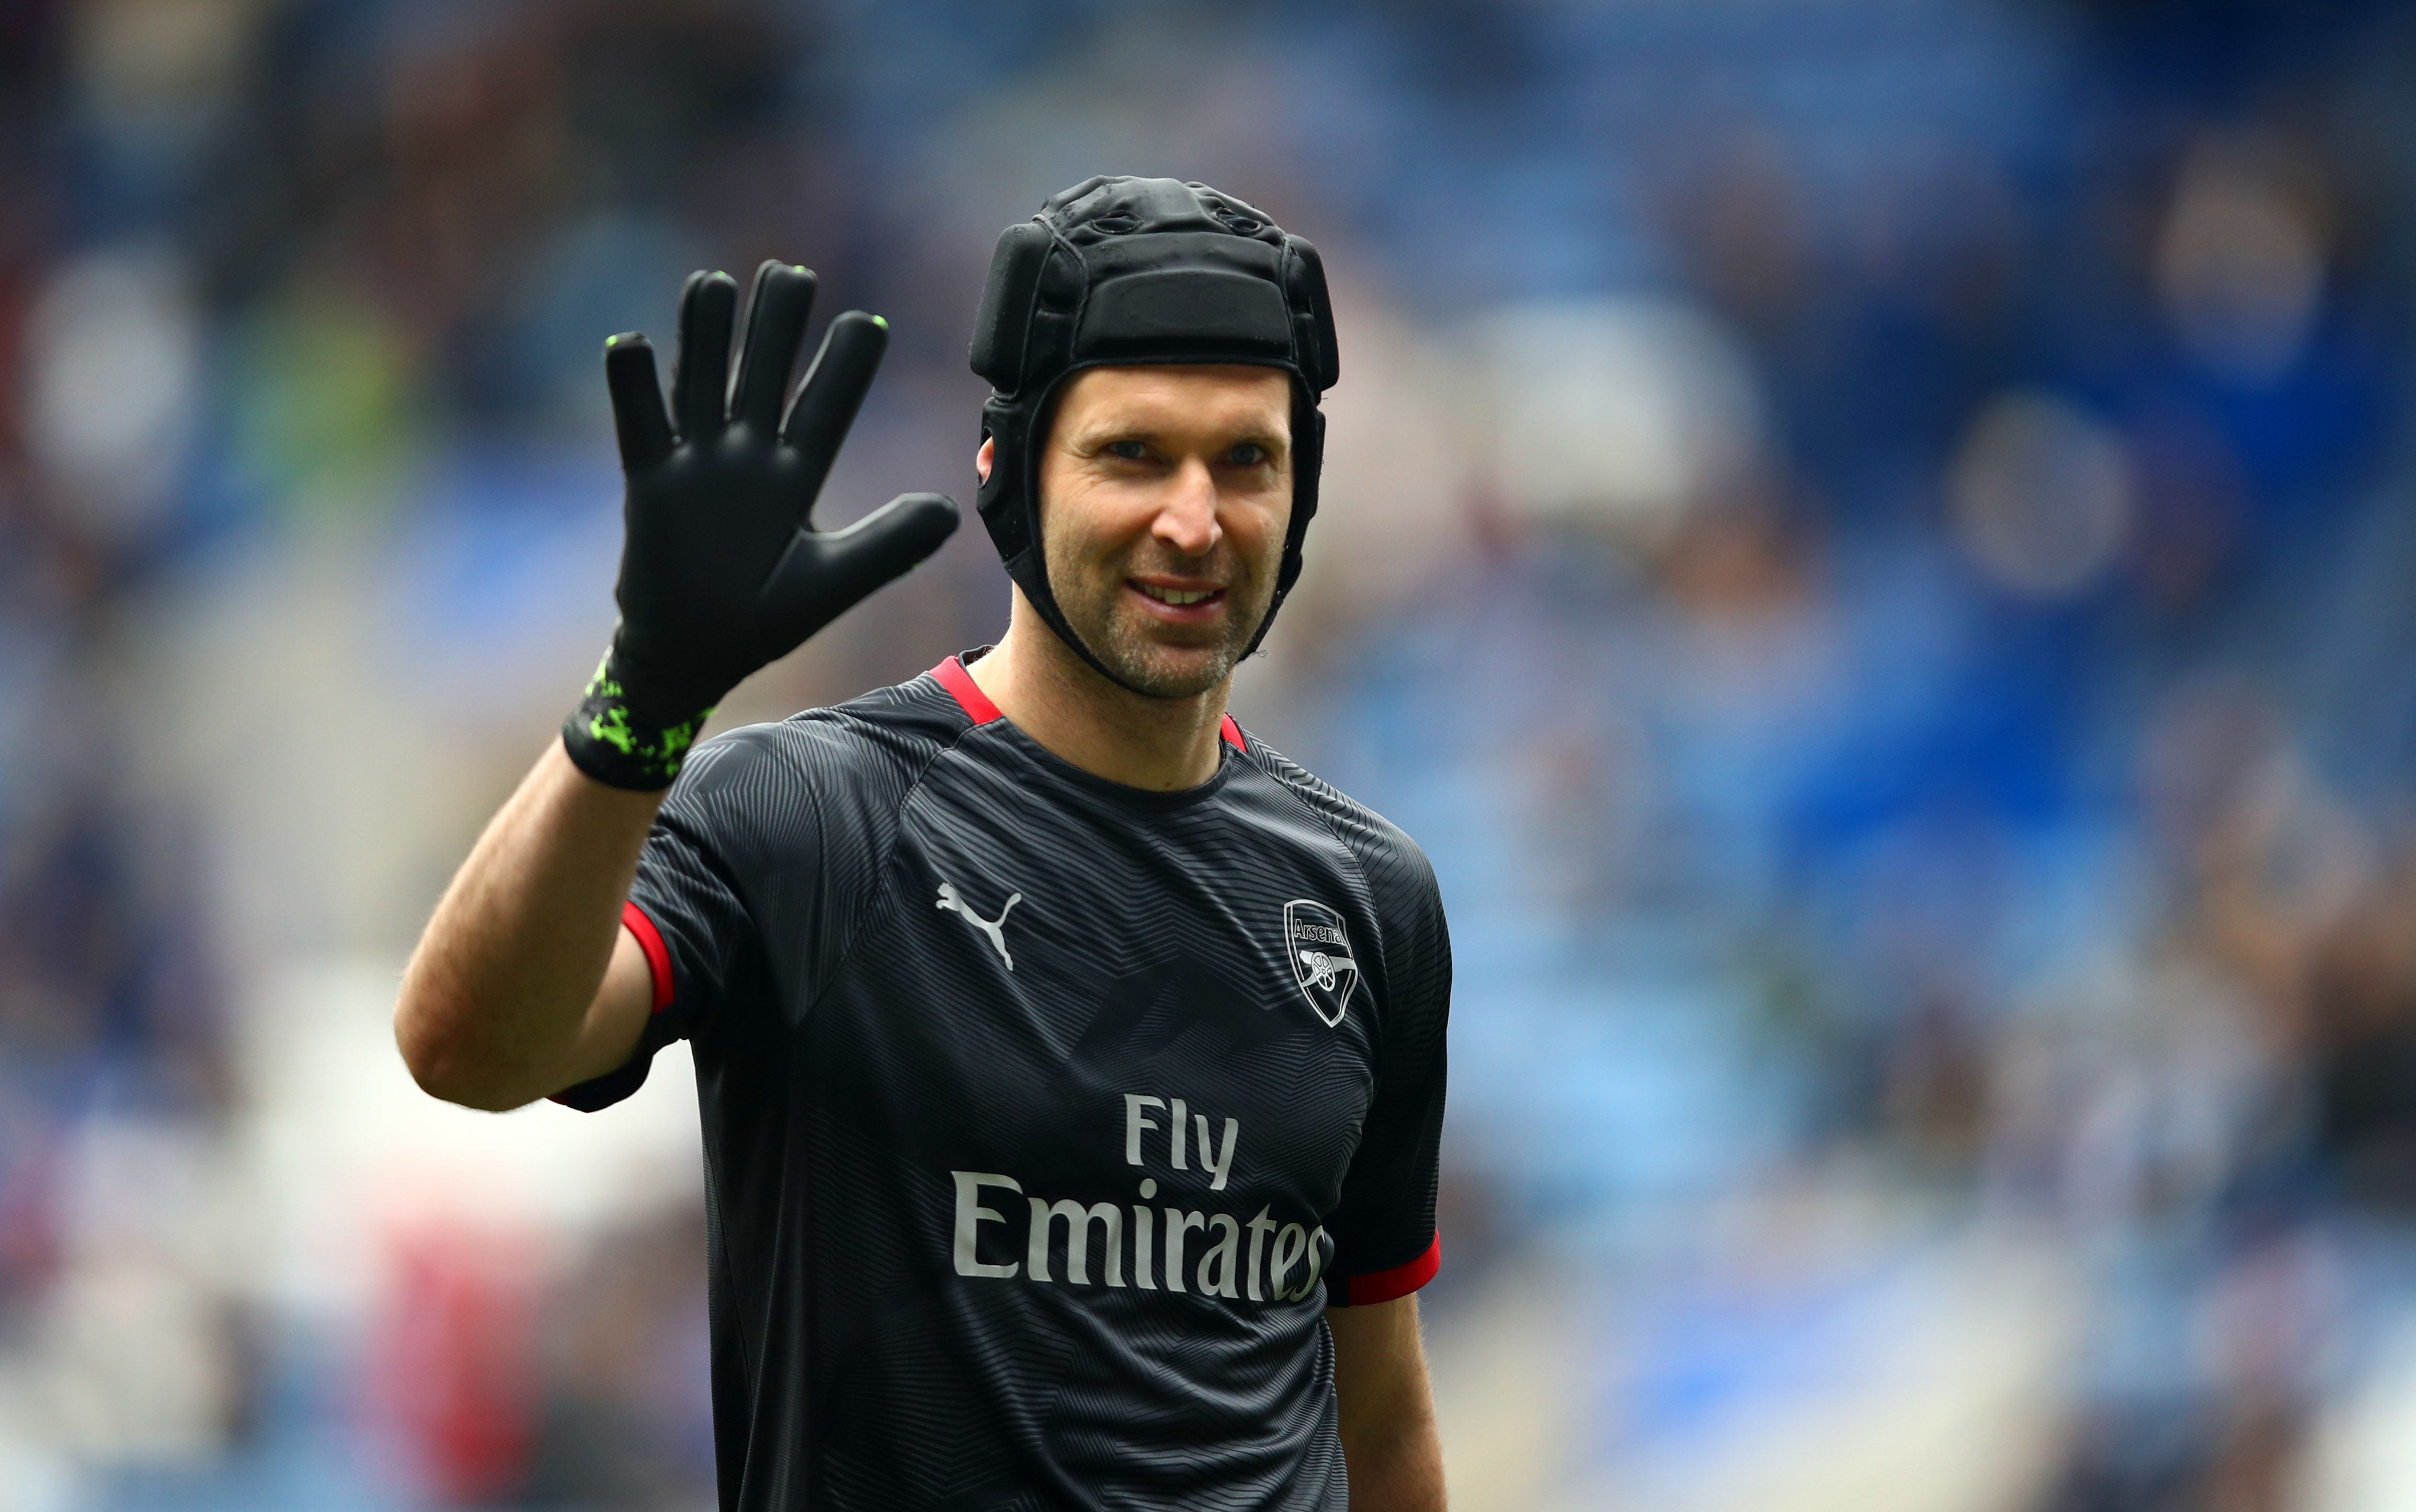 Petr Cech: Playing ice hockey is what I wanted to do